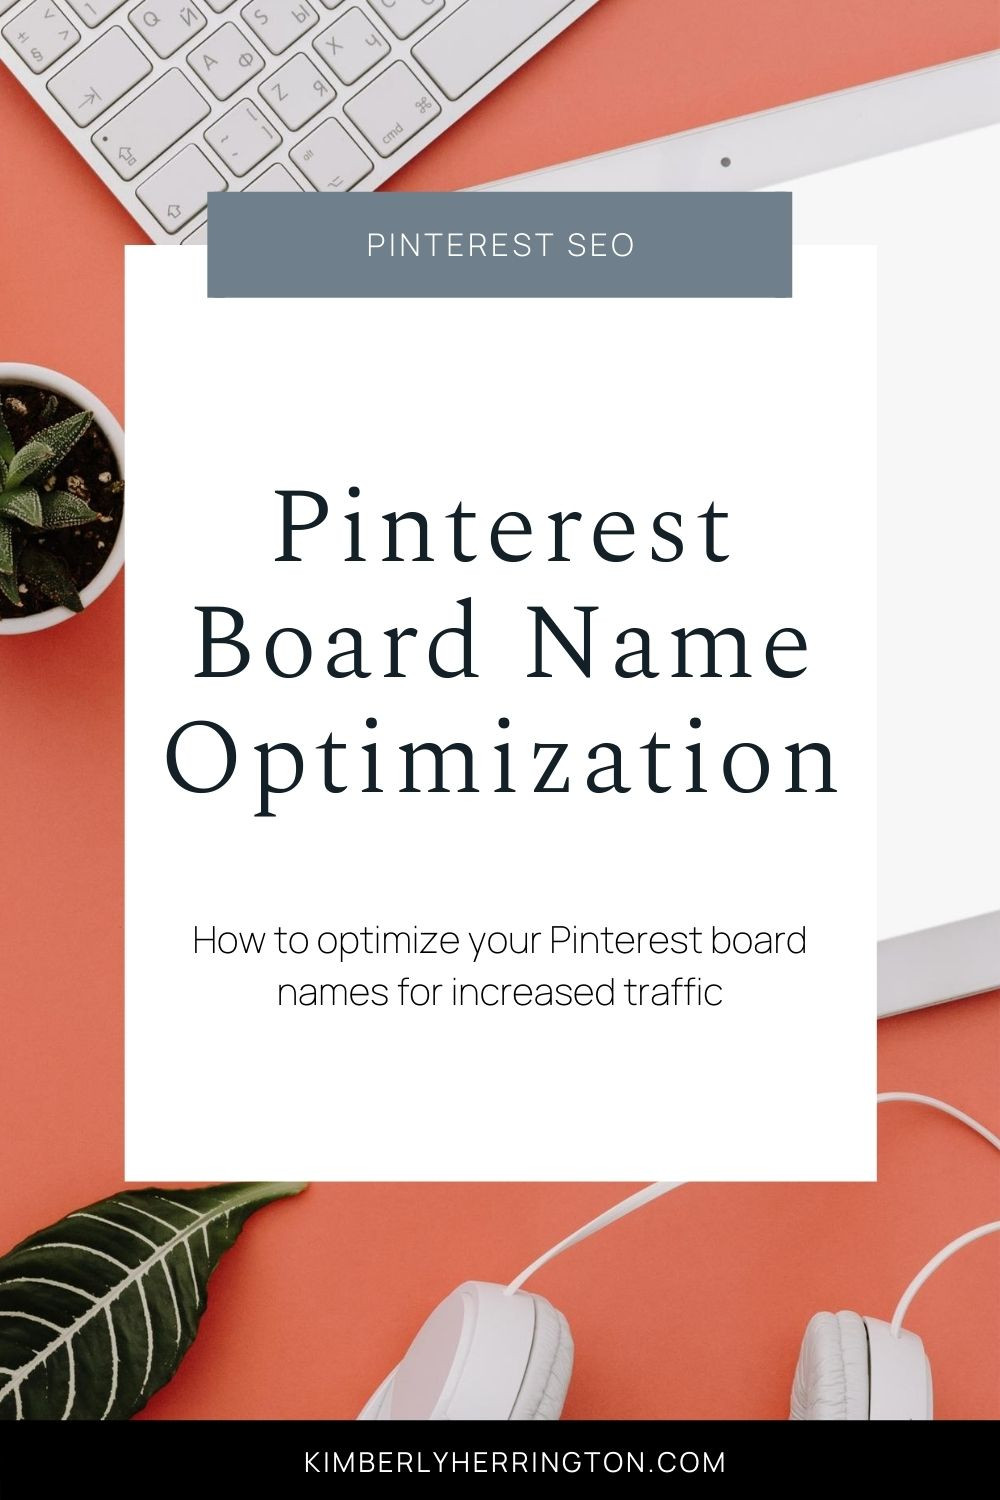 How to optimize Pinterest board names for increased traffic